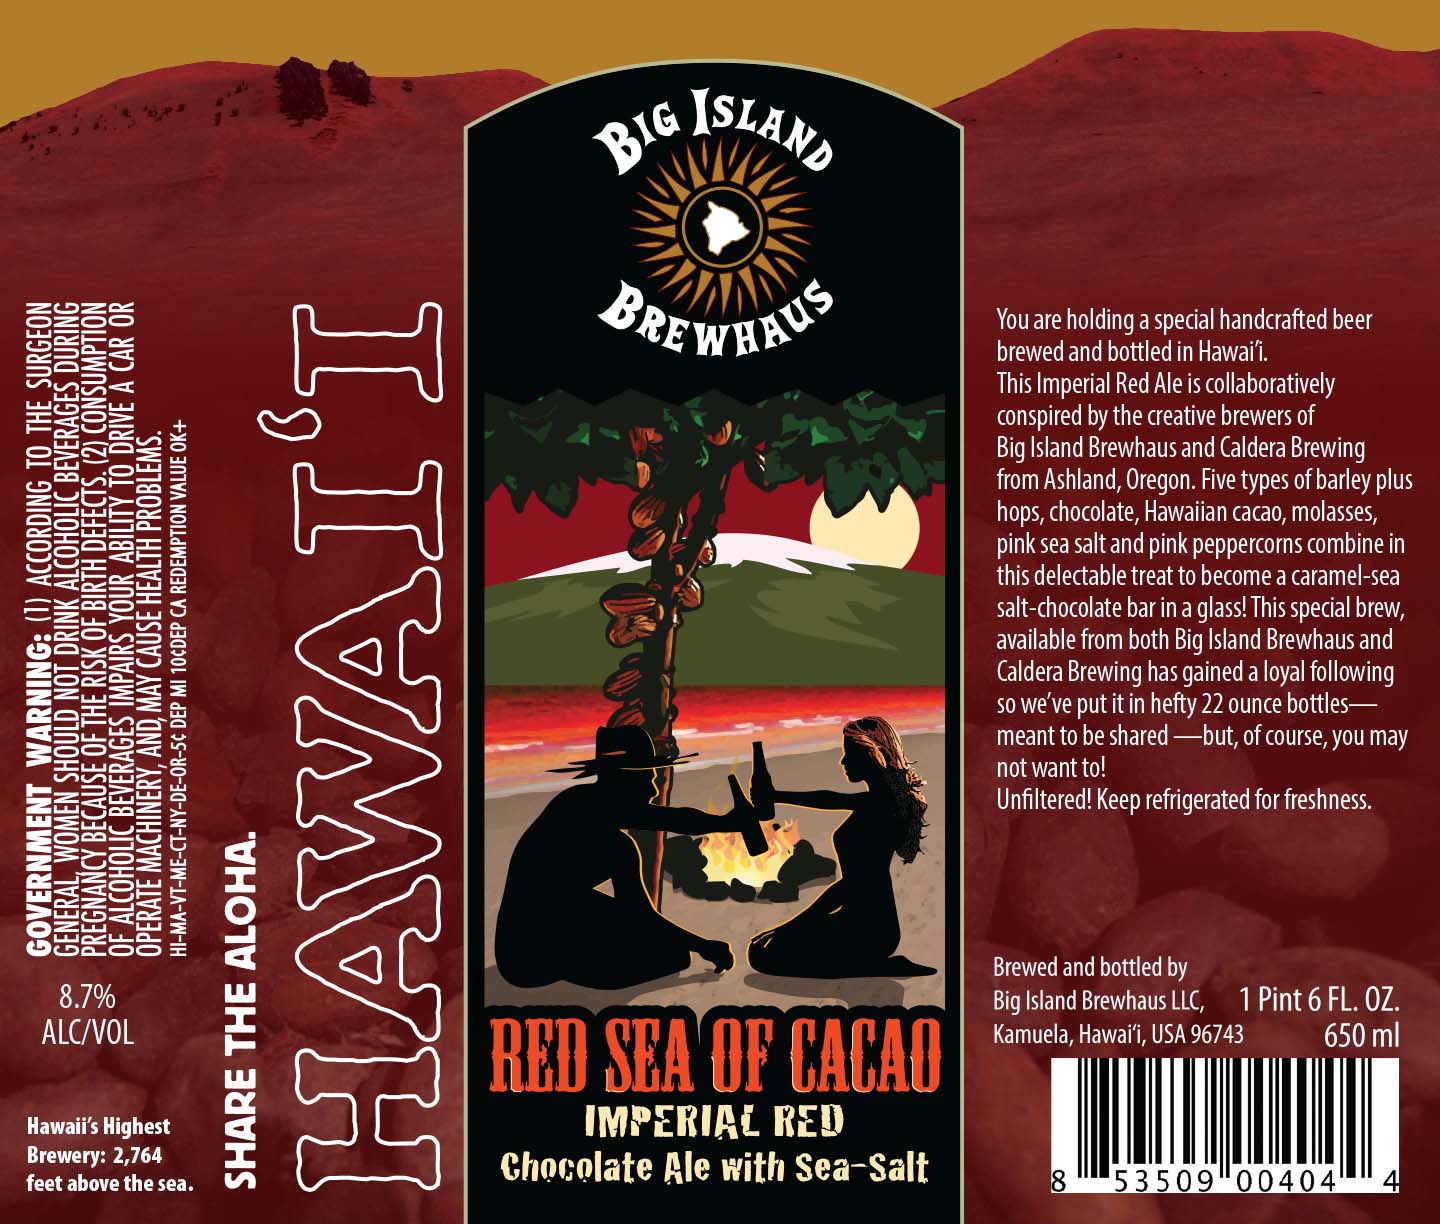 Big-Island-Brewhaus-Red-Sea-of-Cacao-label-by-vapordave